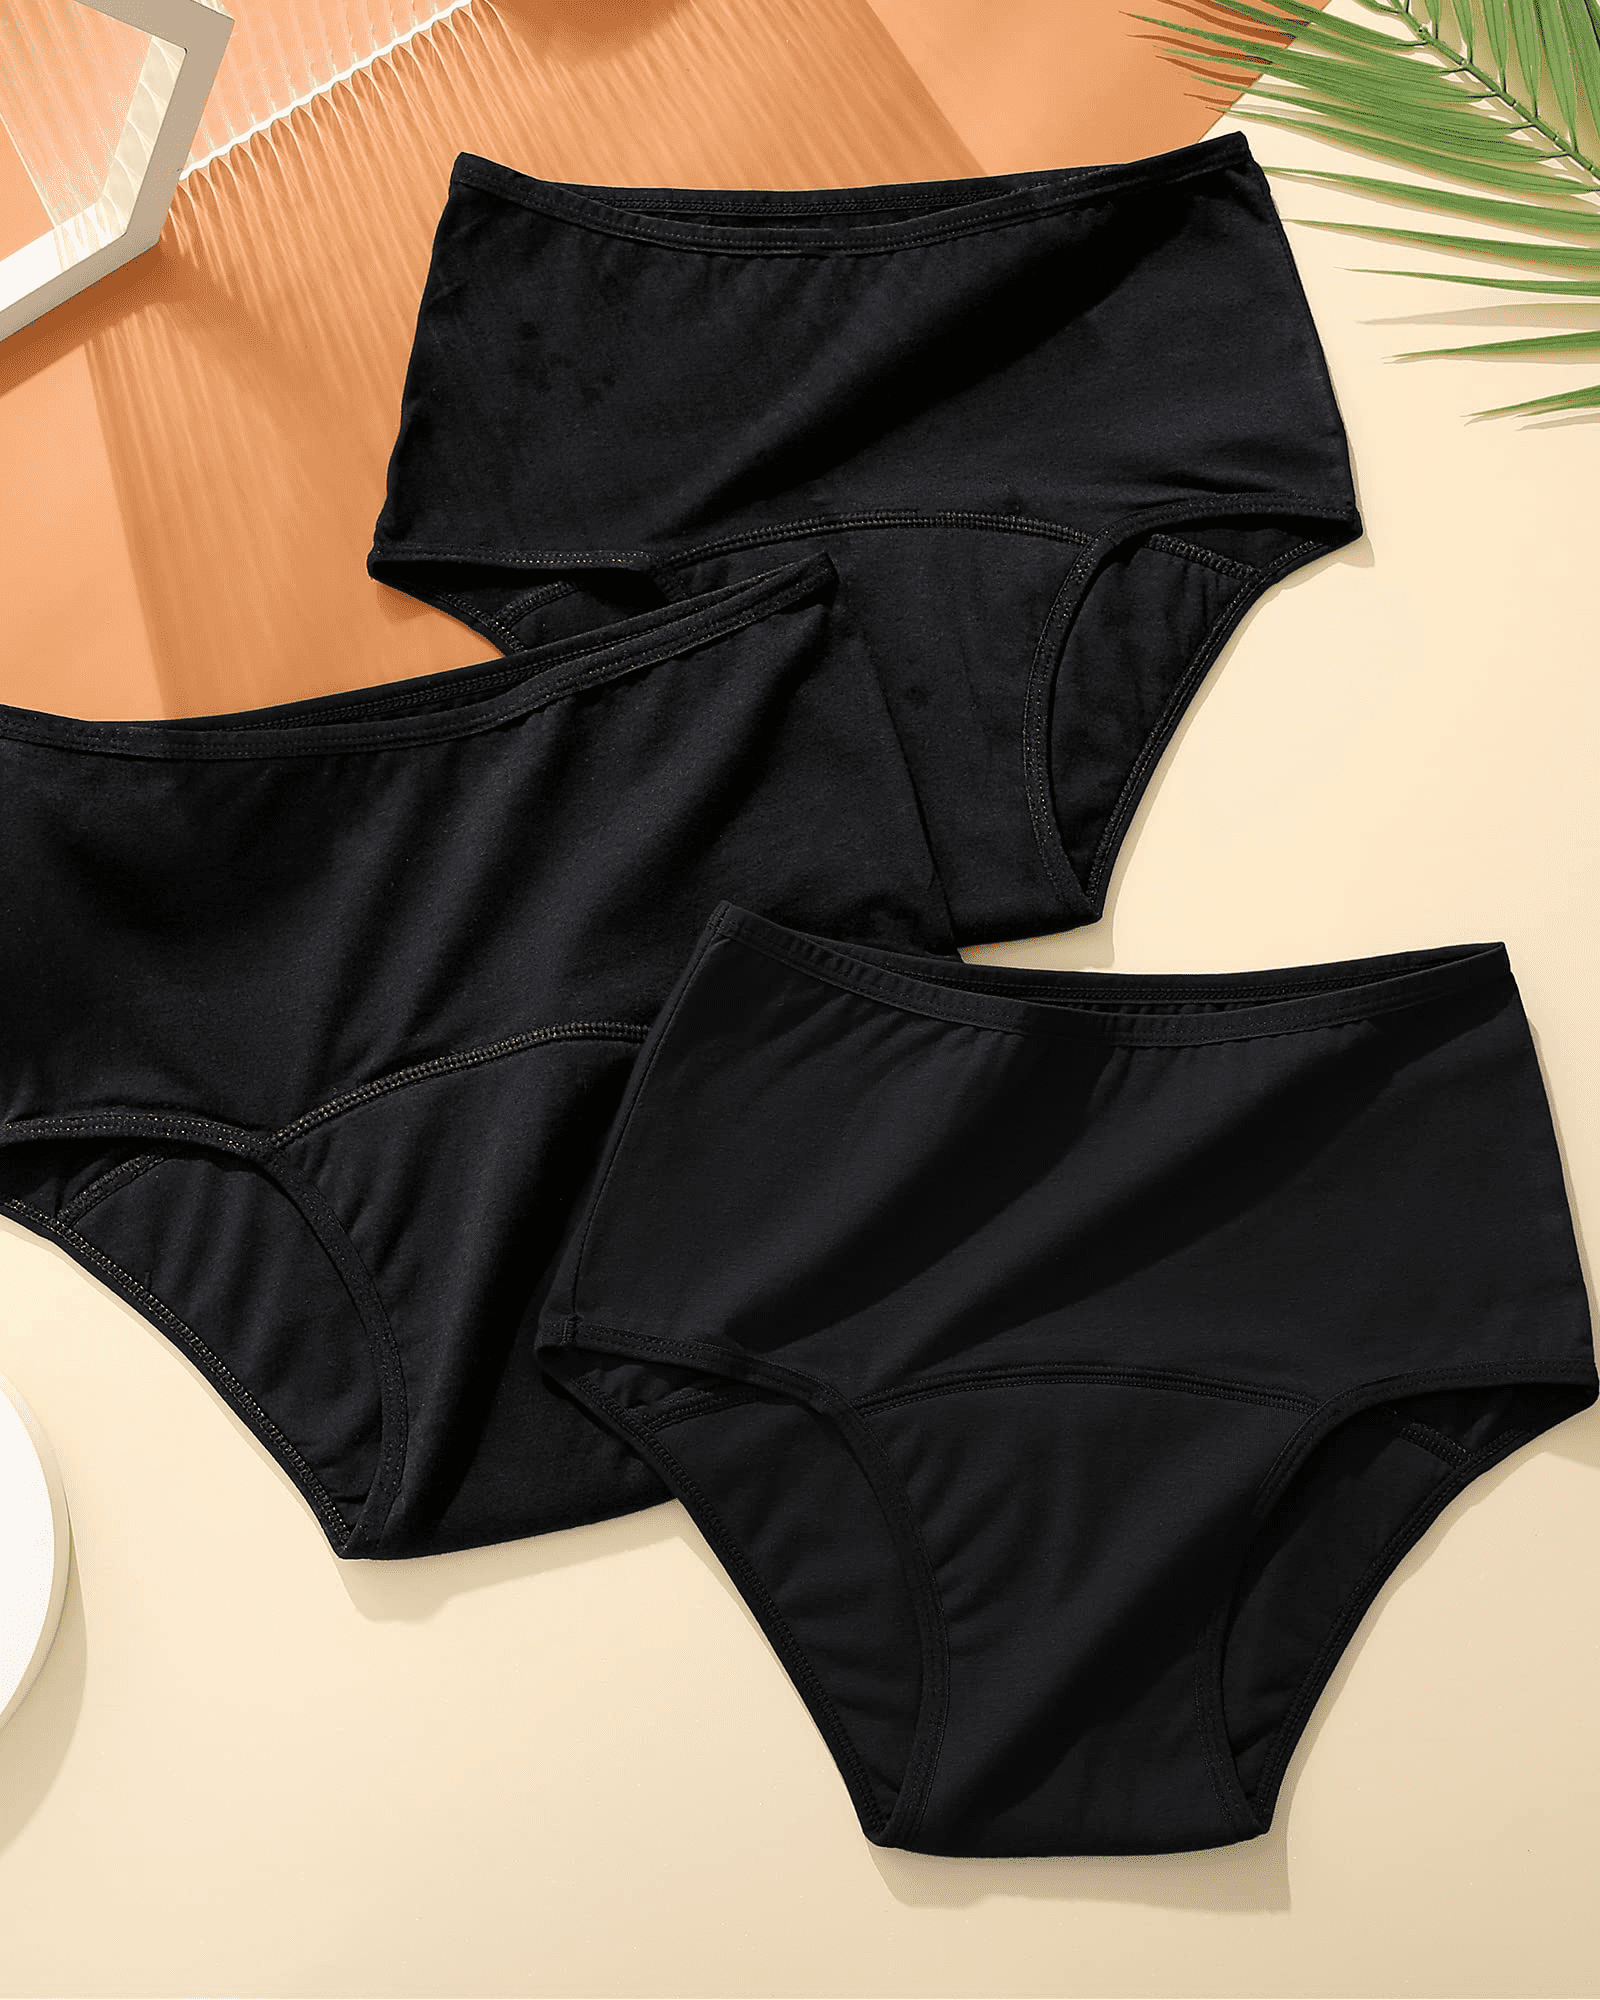 FINETOO 3Pack Period Underwear for Women High Waist Cotton Leakproof  Comfortable Panties High Rise Menstrual Brief S-XL 